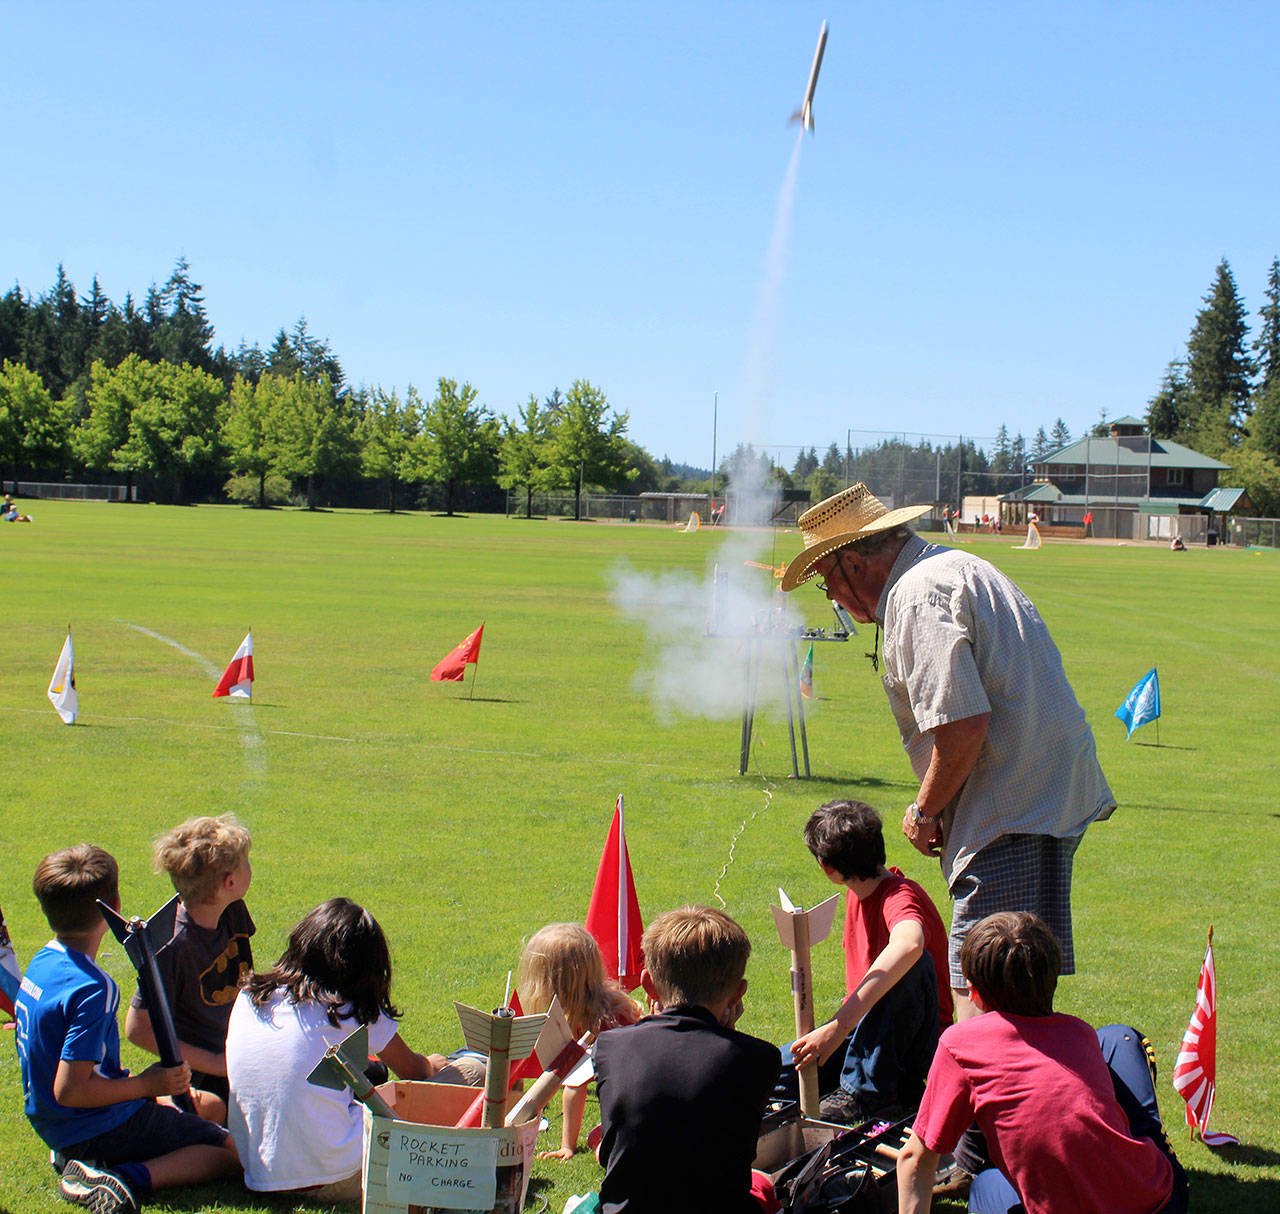 On a soccer field at Langley’s Community Park Thursday morning, one dozen kids launched model rockets they’d made under the guidance of longtime teacher, Leonard Good (right.) Photo by Patricia Guthrie/Whidbey News Group